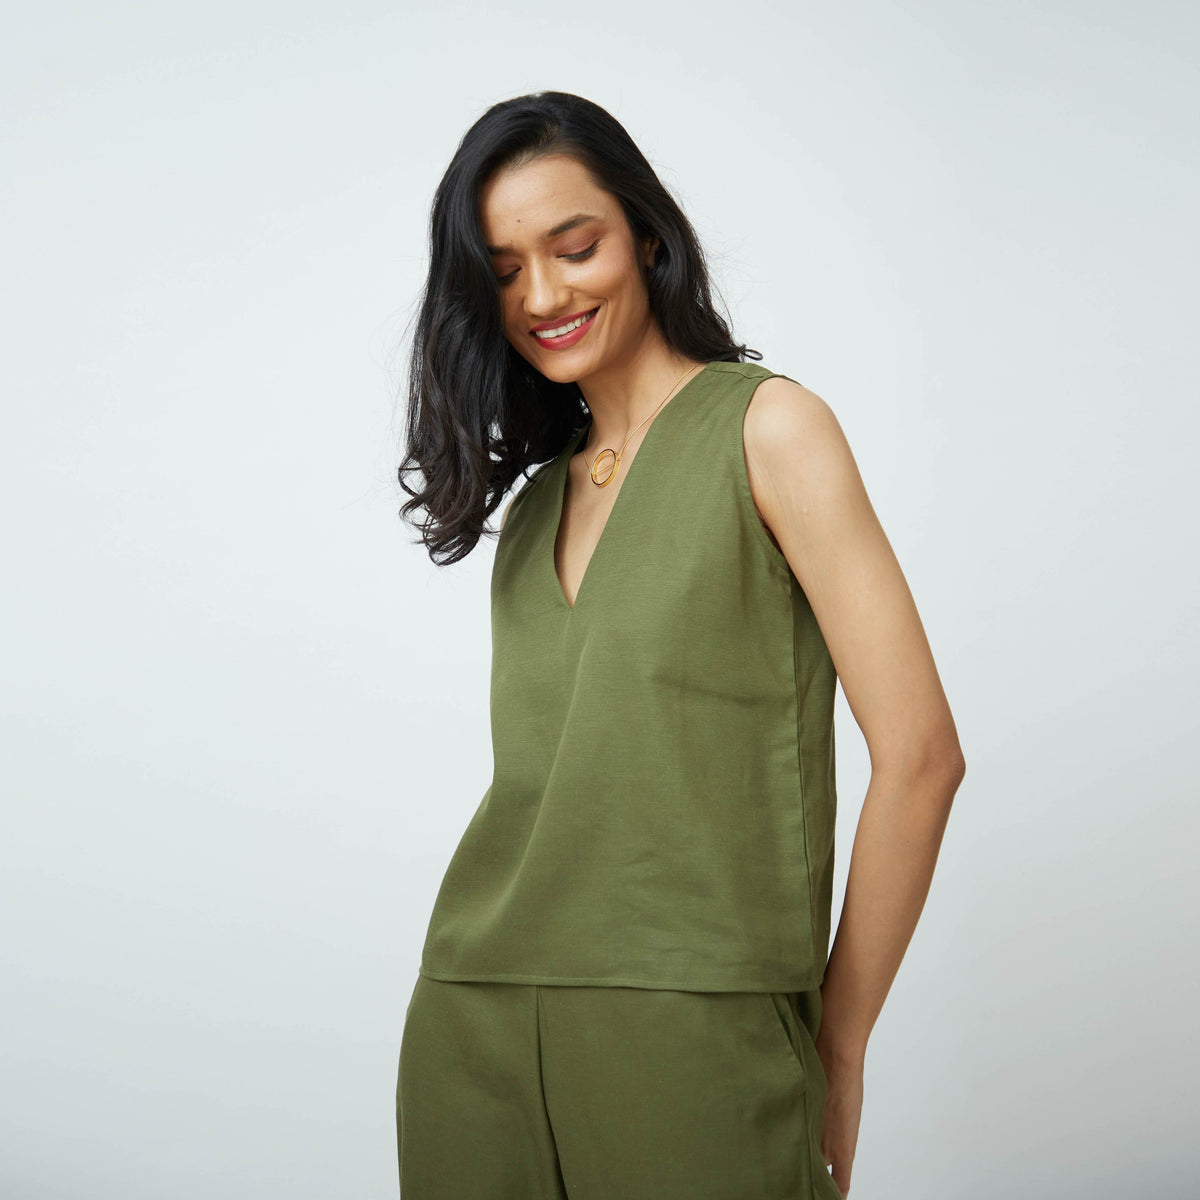 Saltpetre womens wear, indo-western shell top with v-shaped neck in olive green for semi formal, casual, occassional wear. Comfortably elegant woth delivate feminine straps.